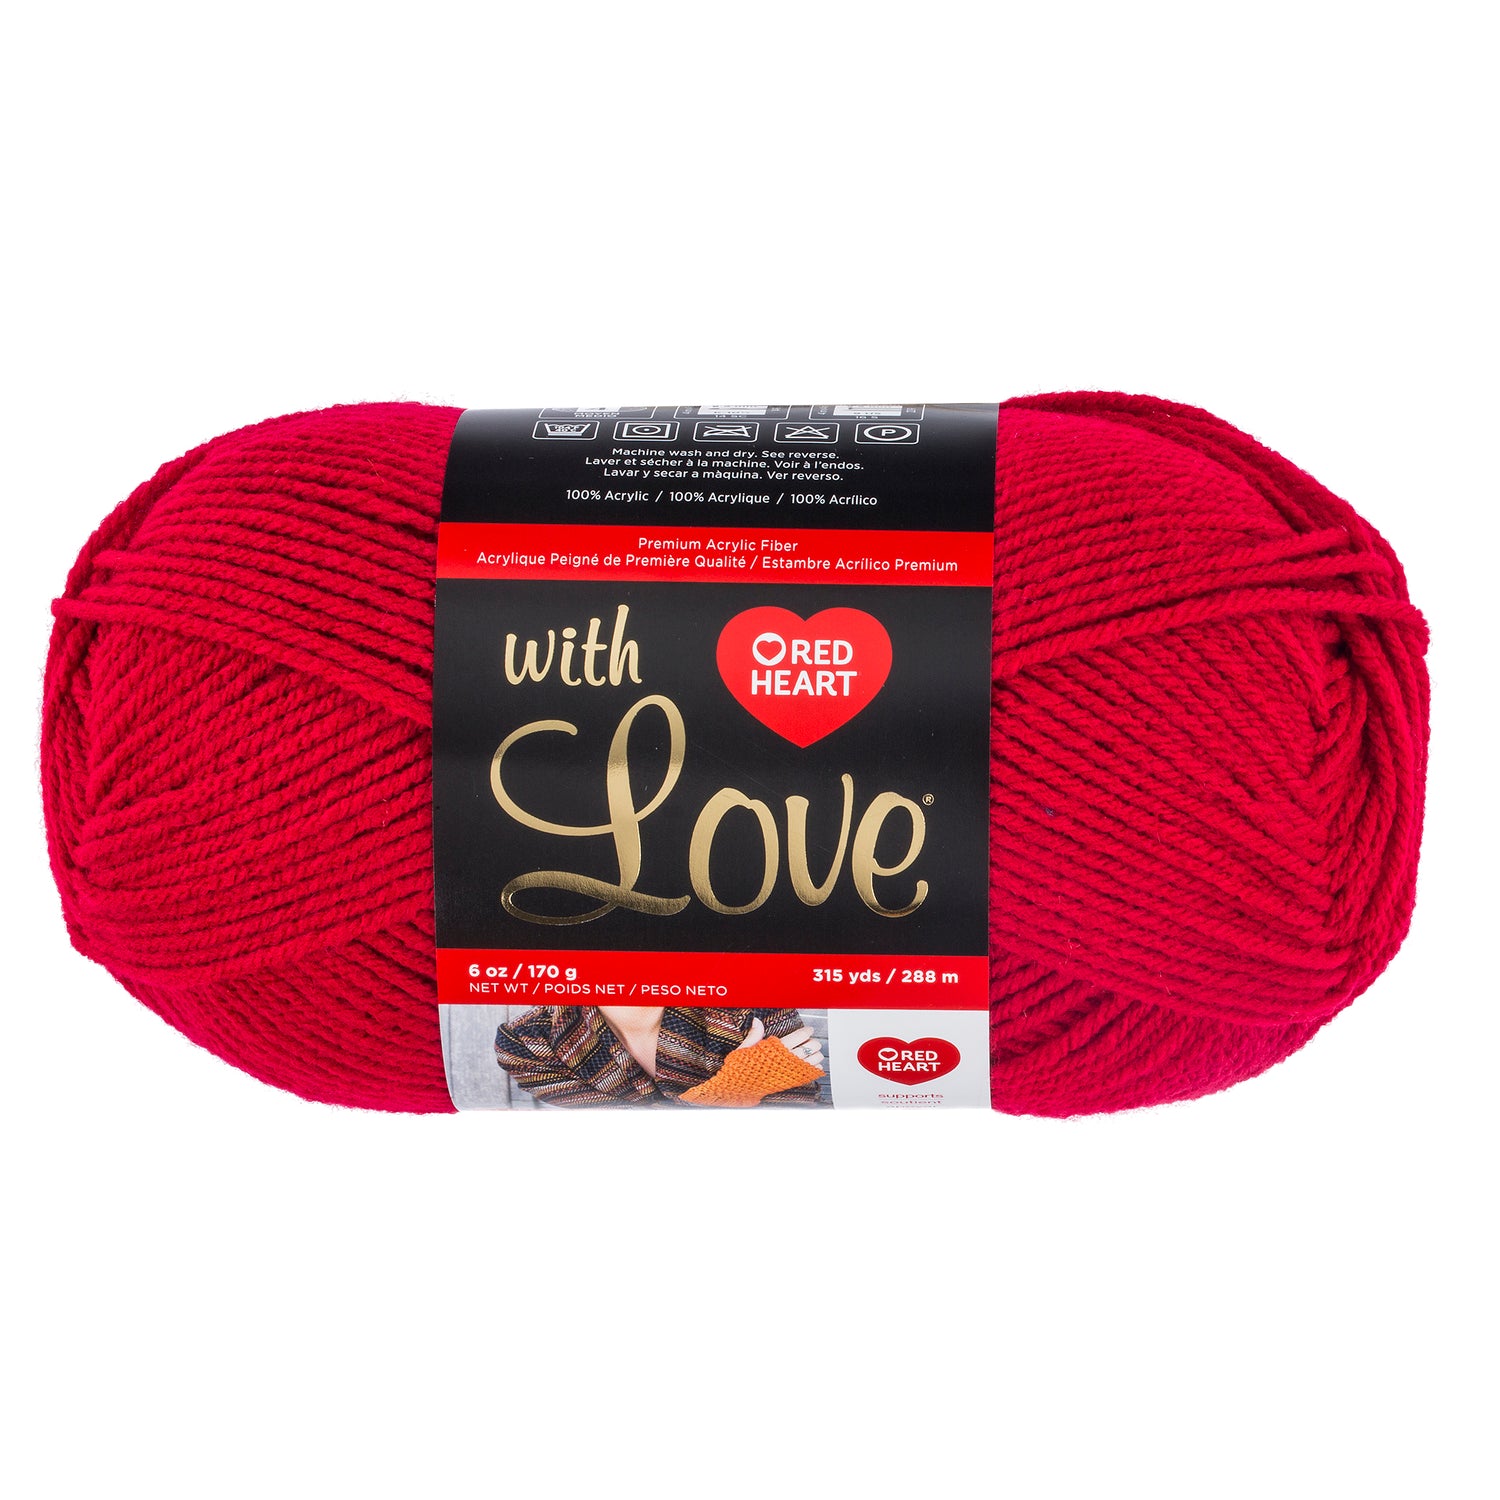 Red Heart With Love Yarn (170g/4.5oz) - Discontinued Shades